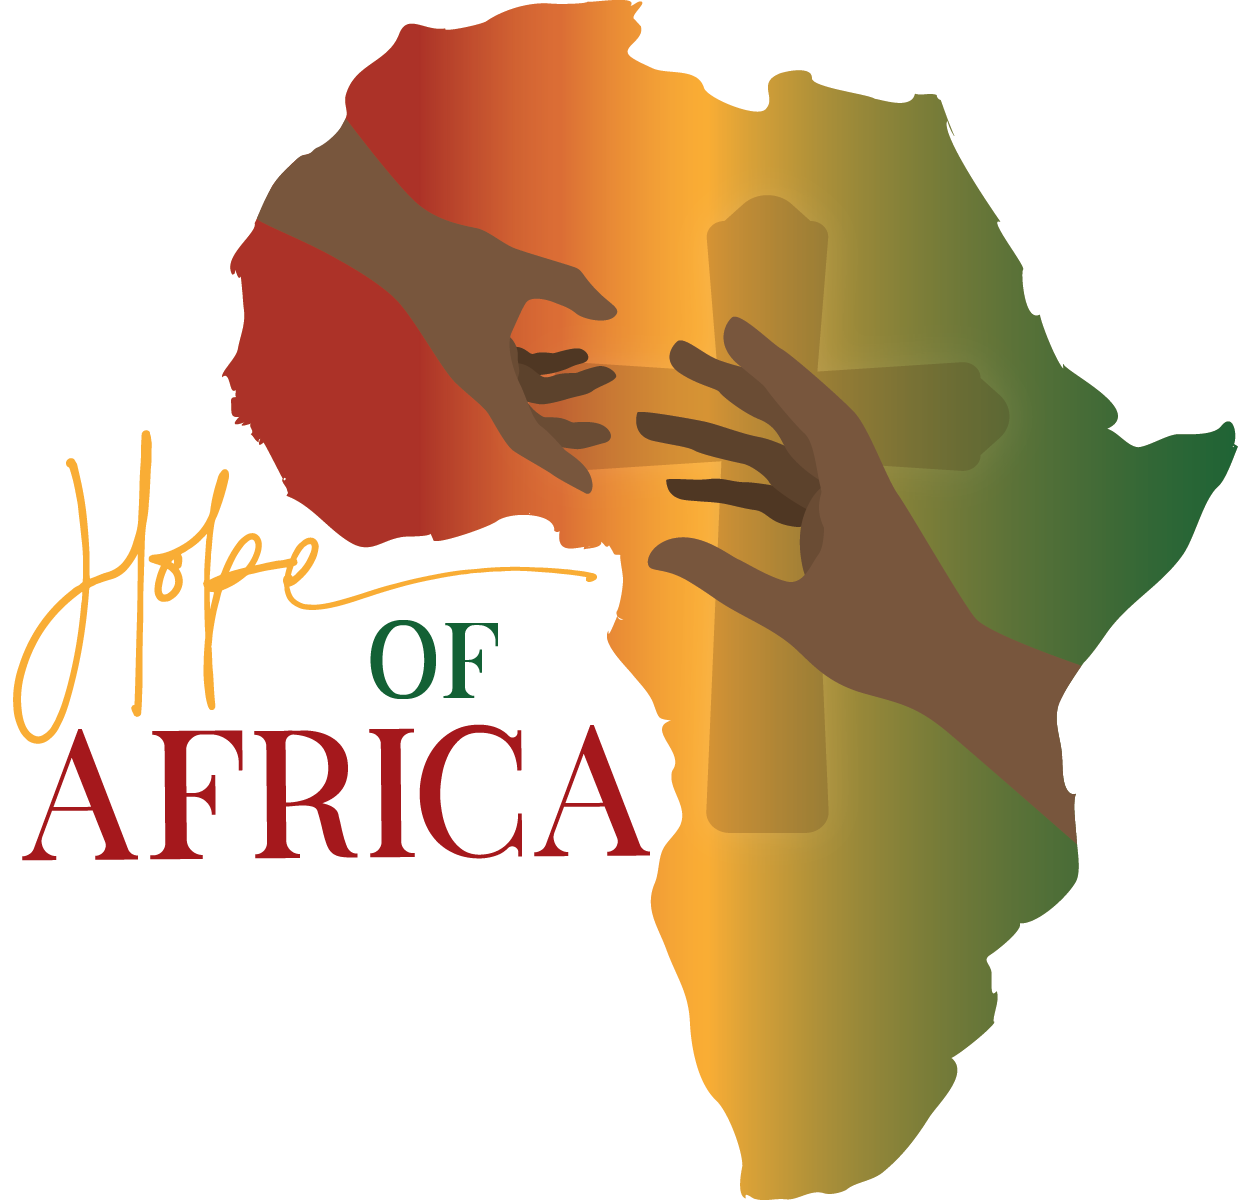 Hope of Africa